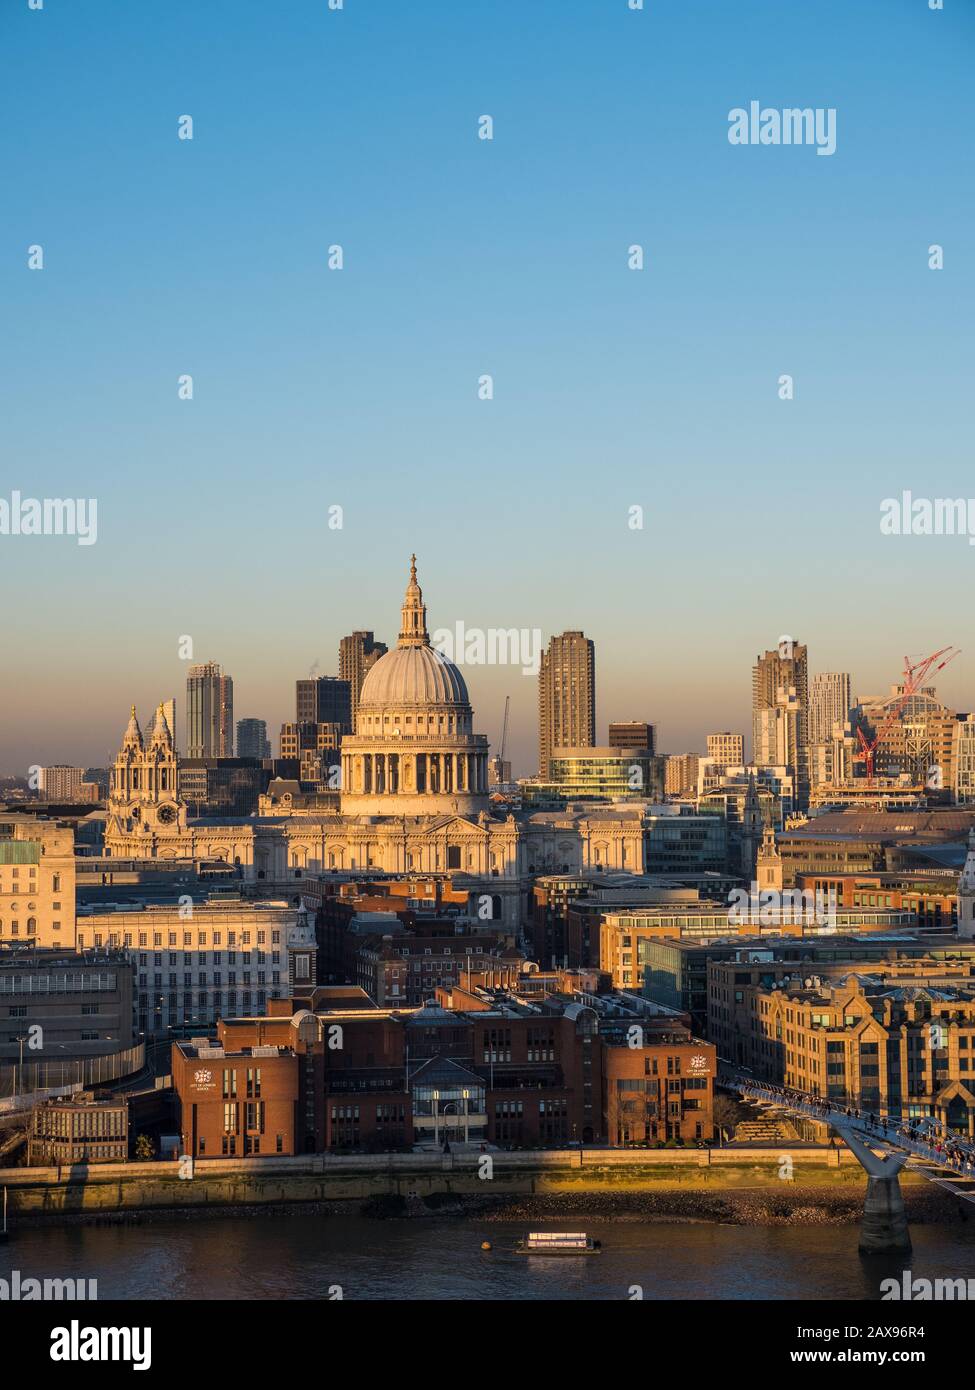 St Paul's Cathedral, Sunset, City of London, England, UK, GB. Stock Photo